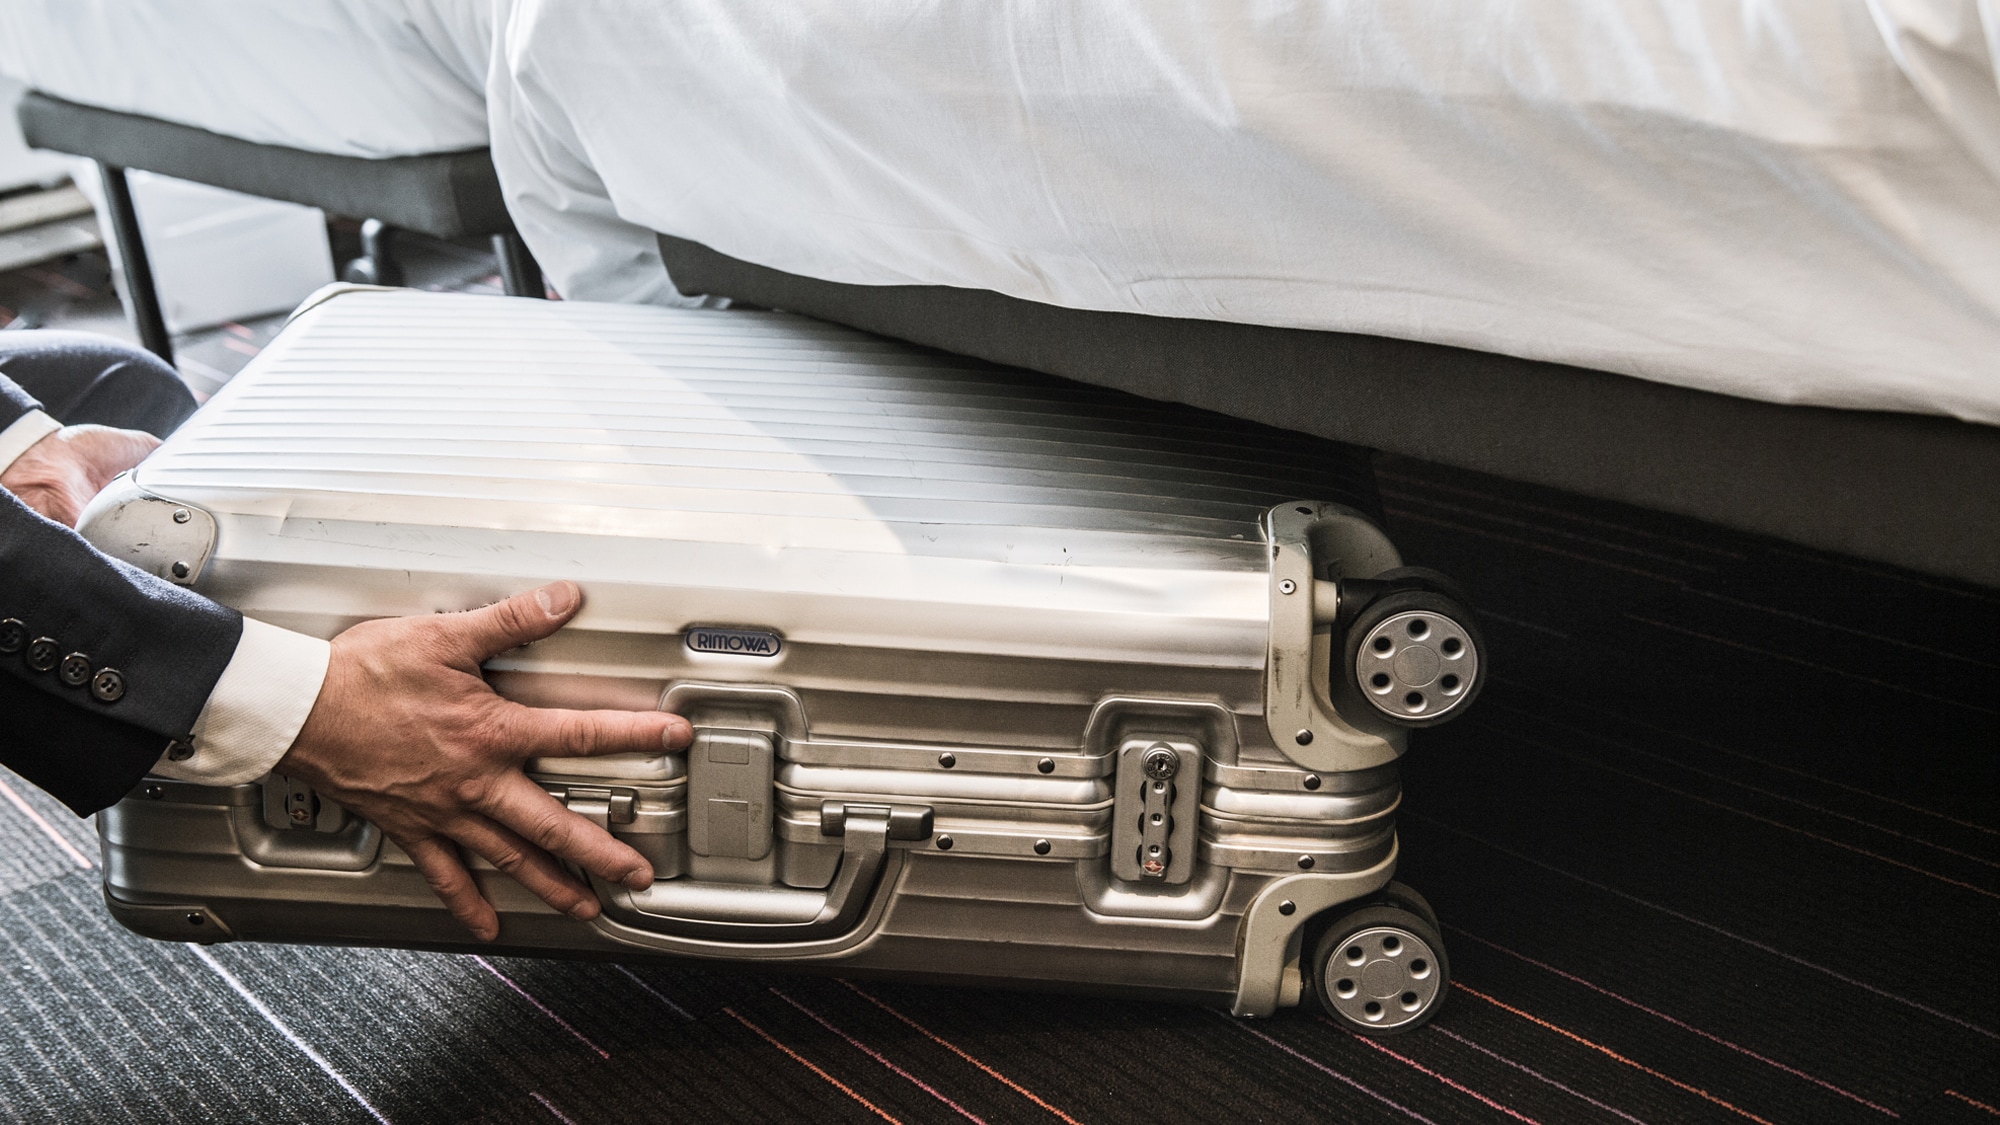 Store your suitcase in the bed